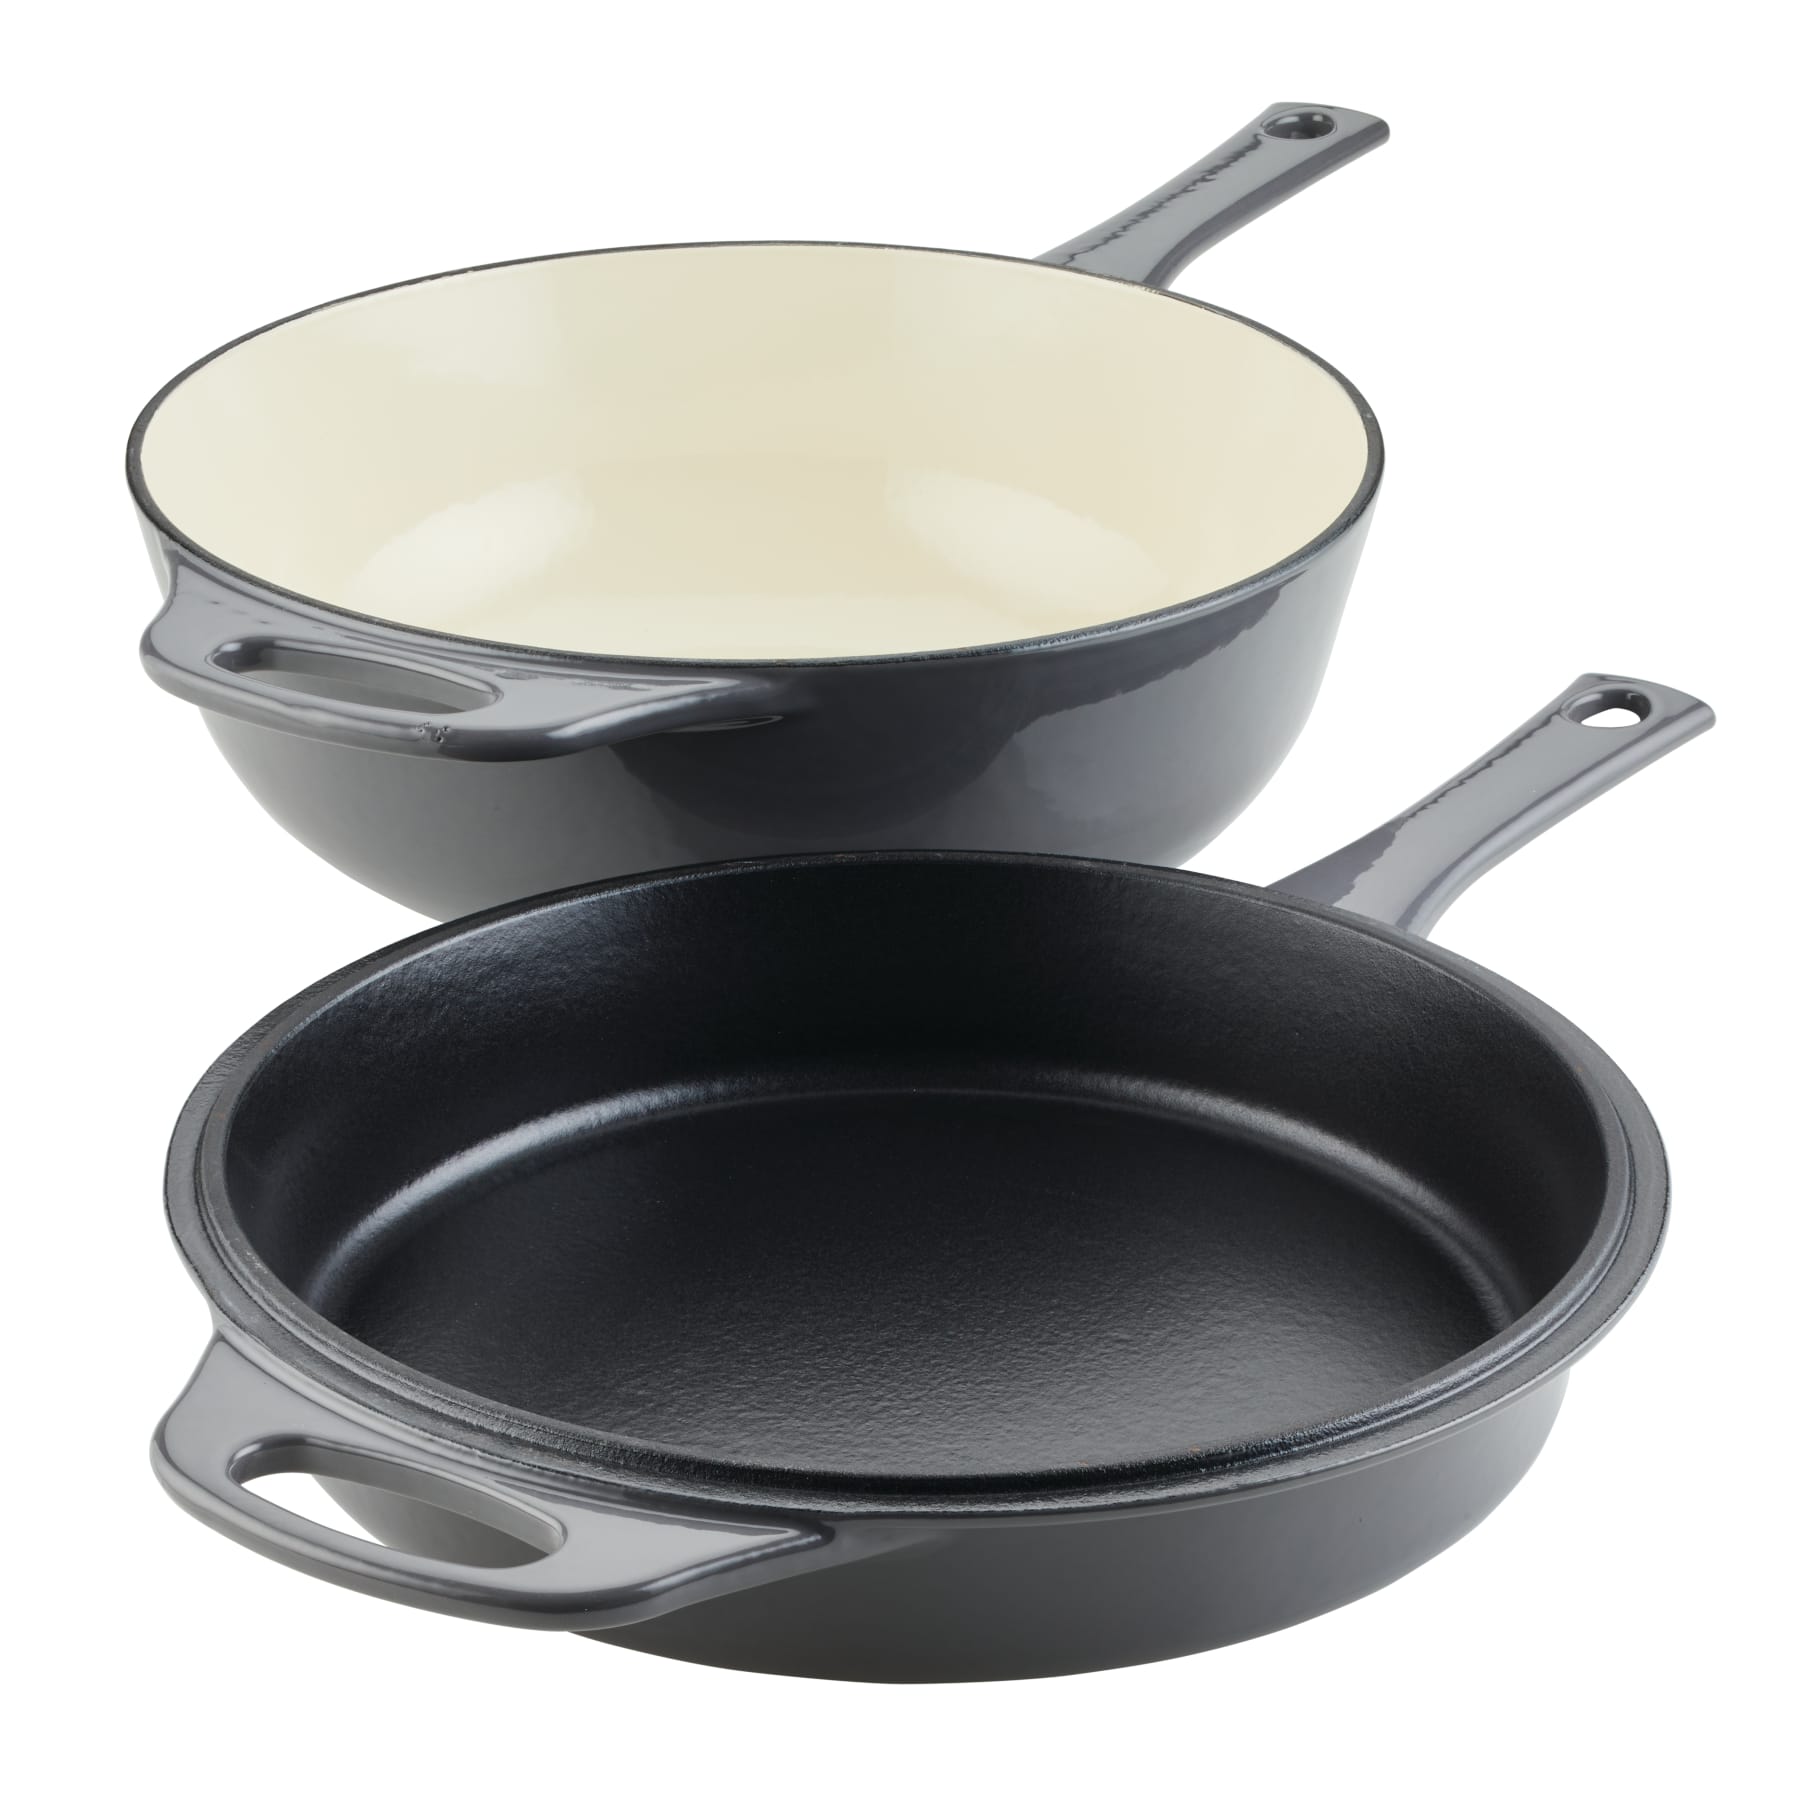 Worth it to purchase? ($40) 14-inch cast iron pan with lid : r